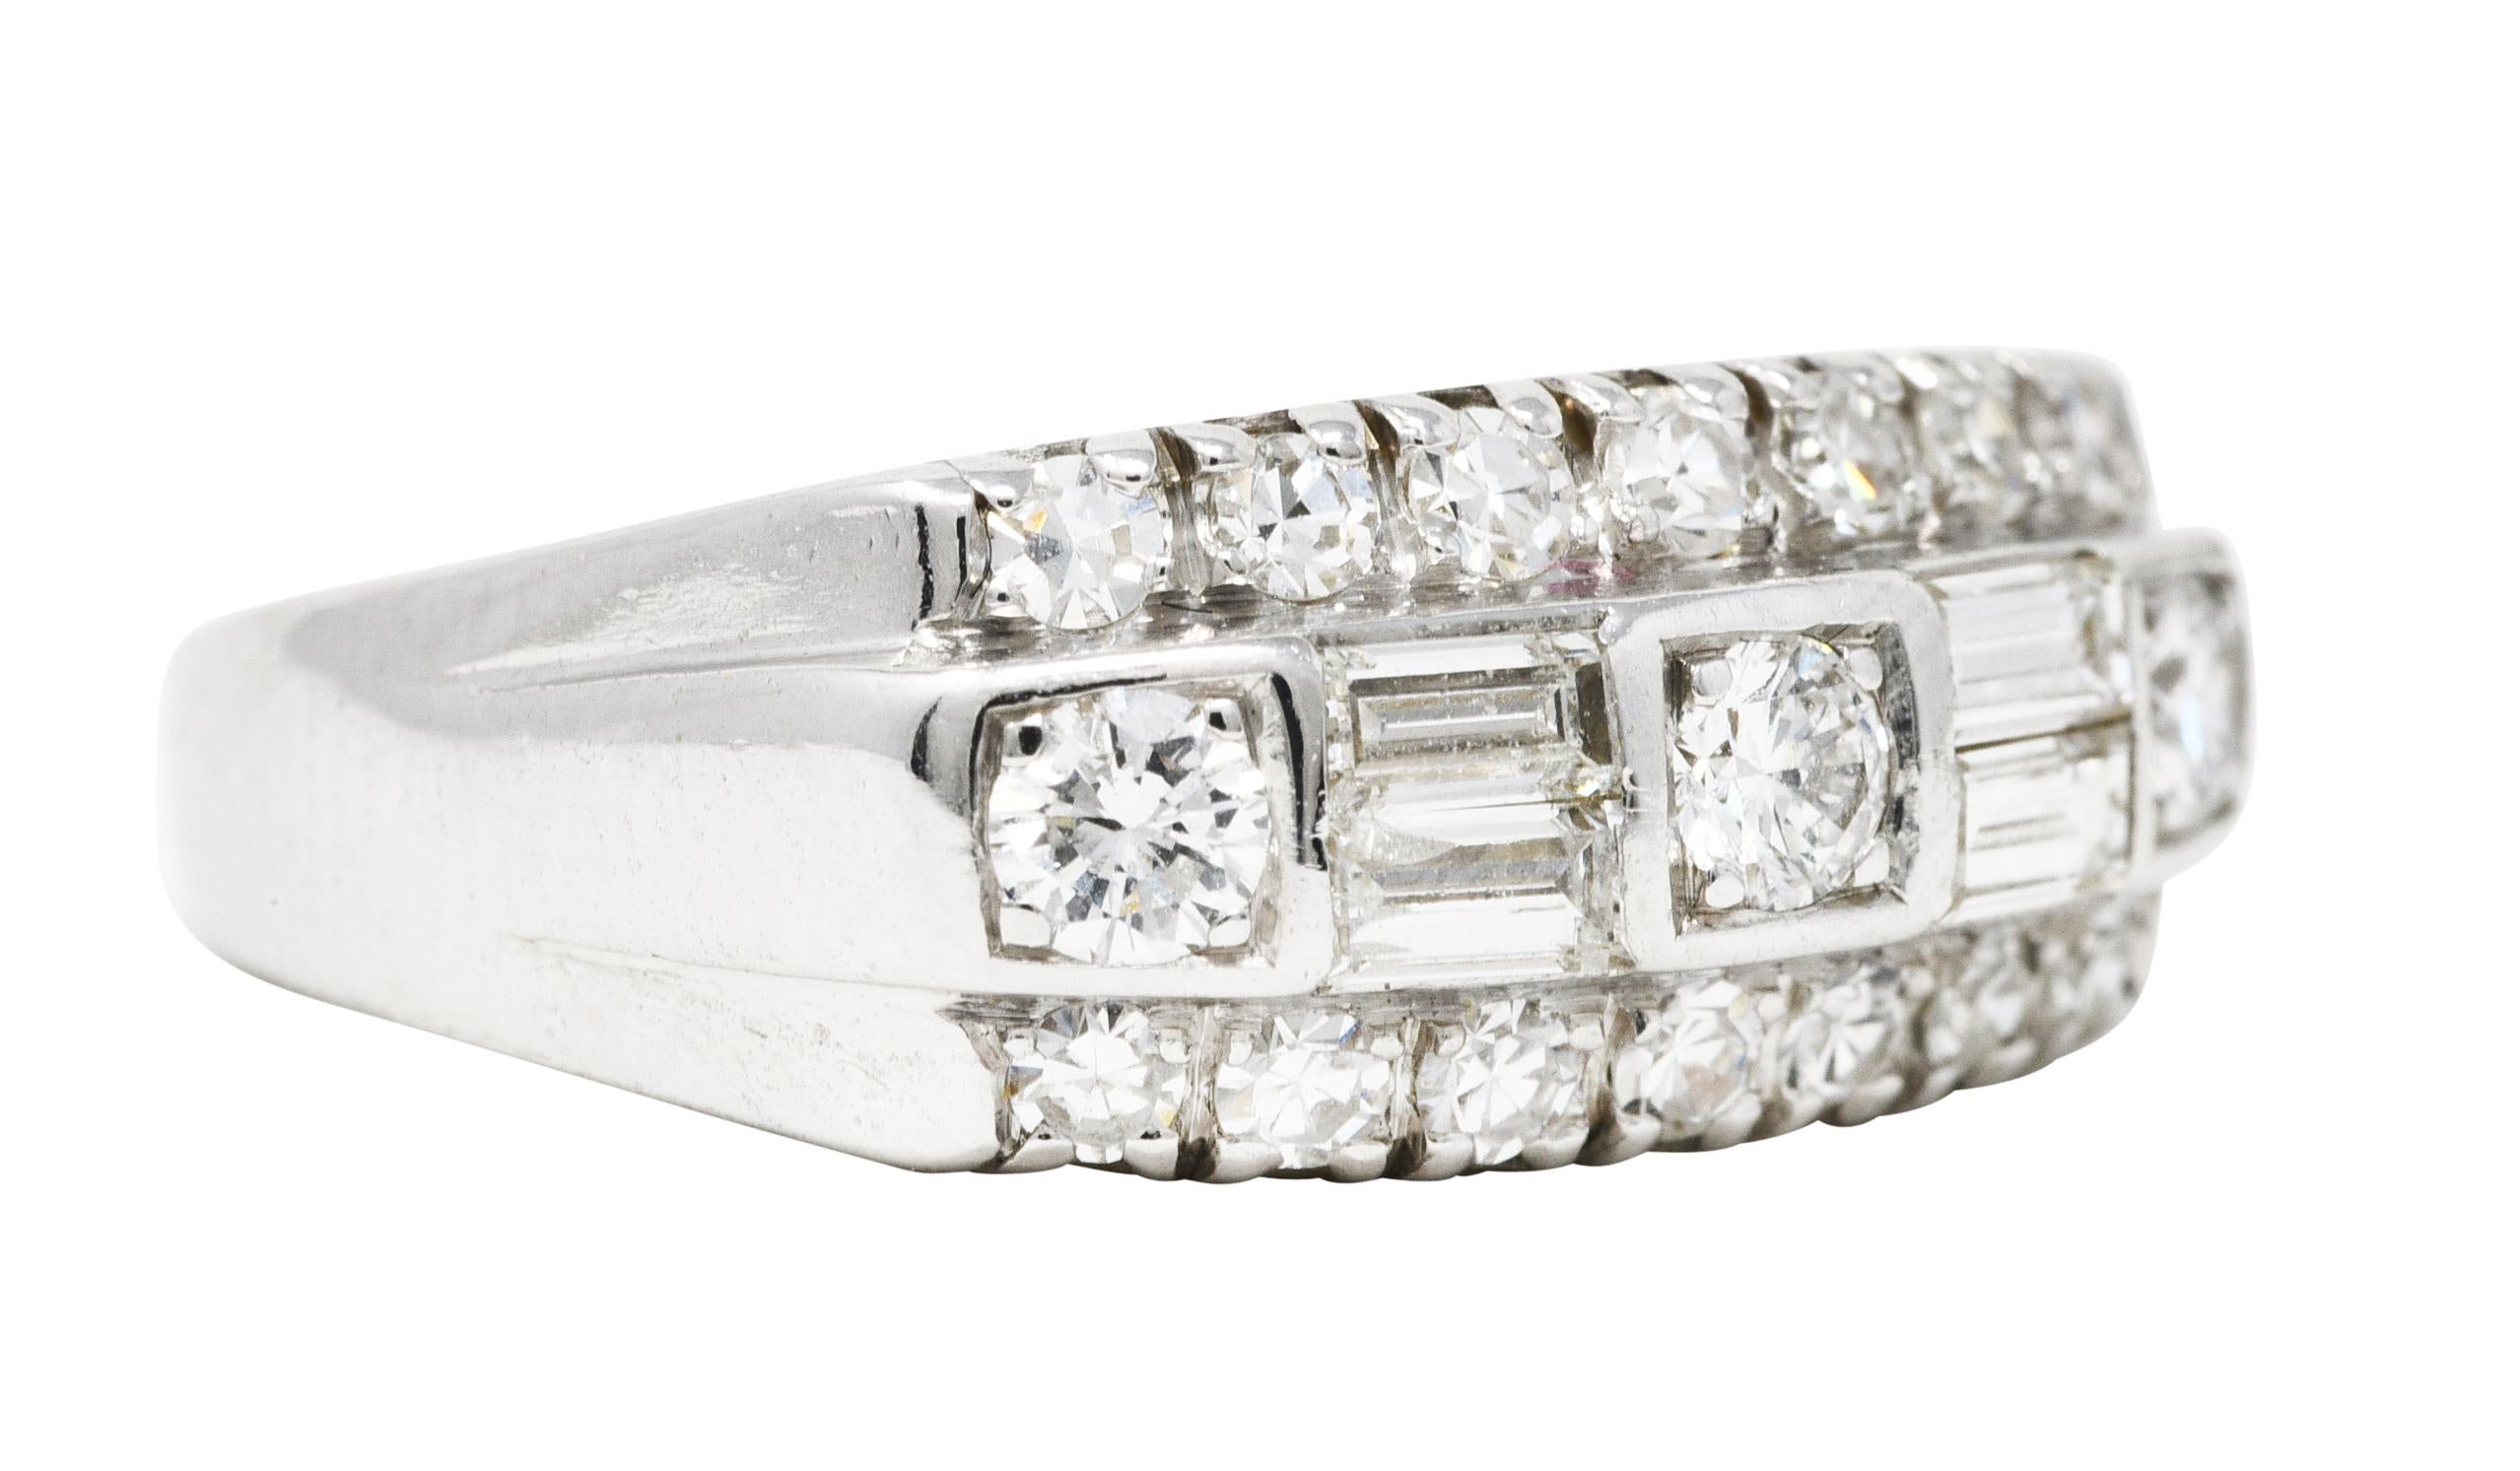 Band is designed as a rectangular form set with three rows of diamonds - East to West. Center row has round brilliant cut diamonds alternating with baguette cut diamonds. Flanked North to South by fishtail set single cut diamonds. Total diamond